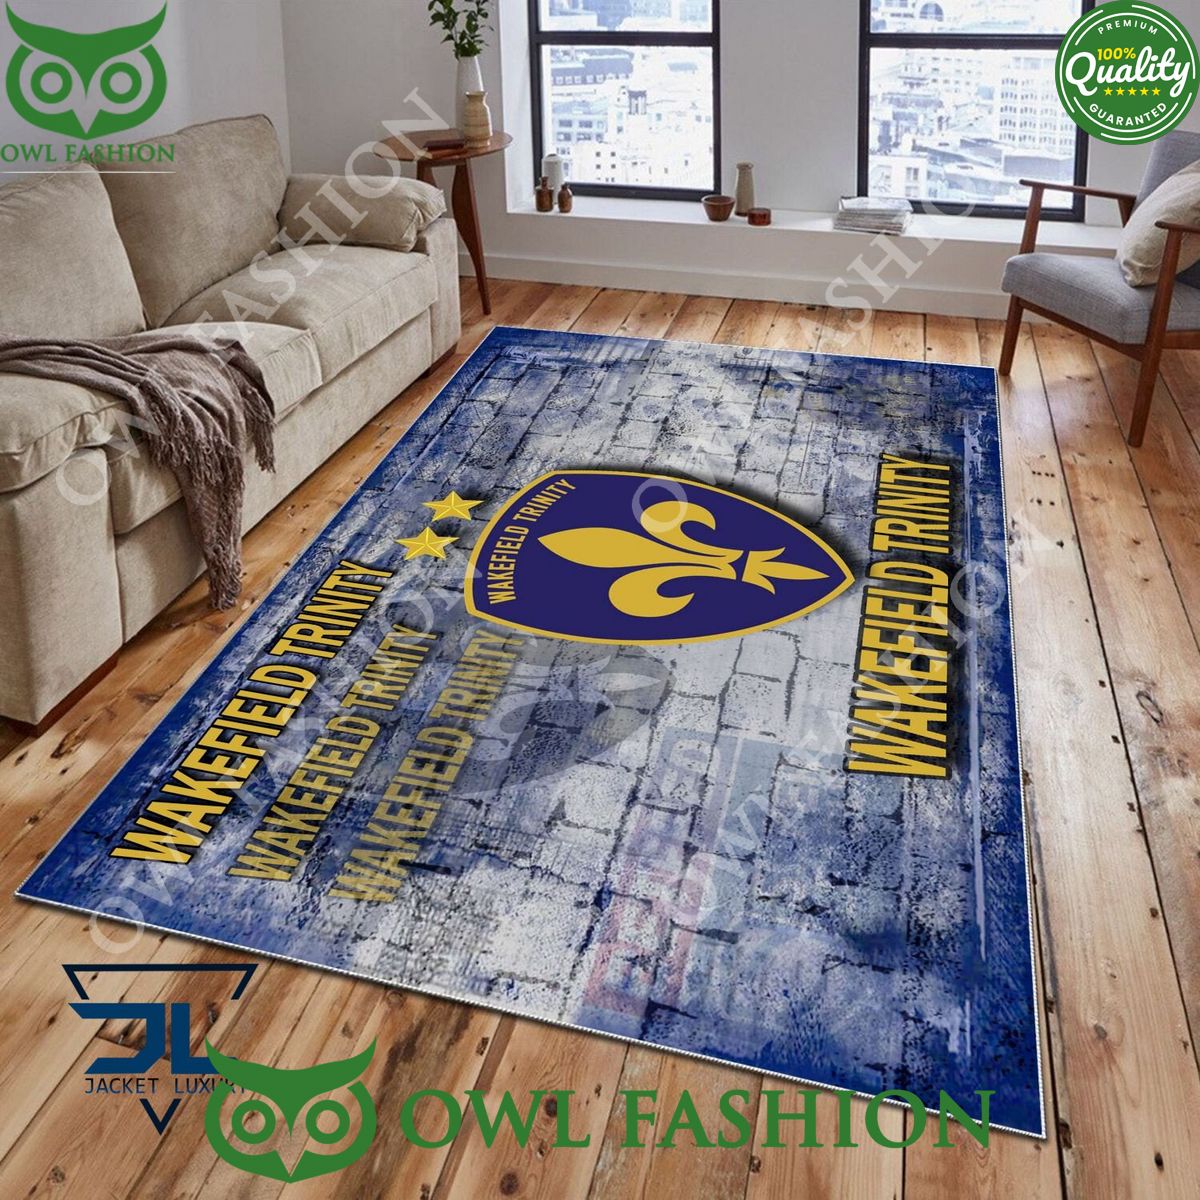 Wakefield Trinity Super League Rugby Carpet Rug